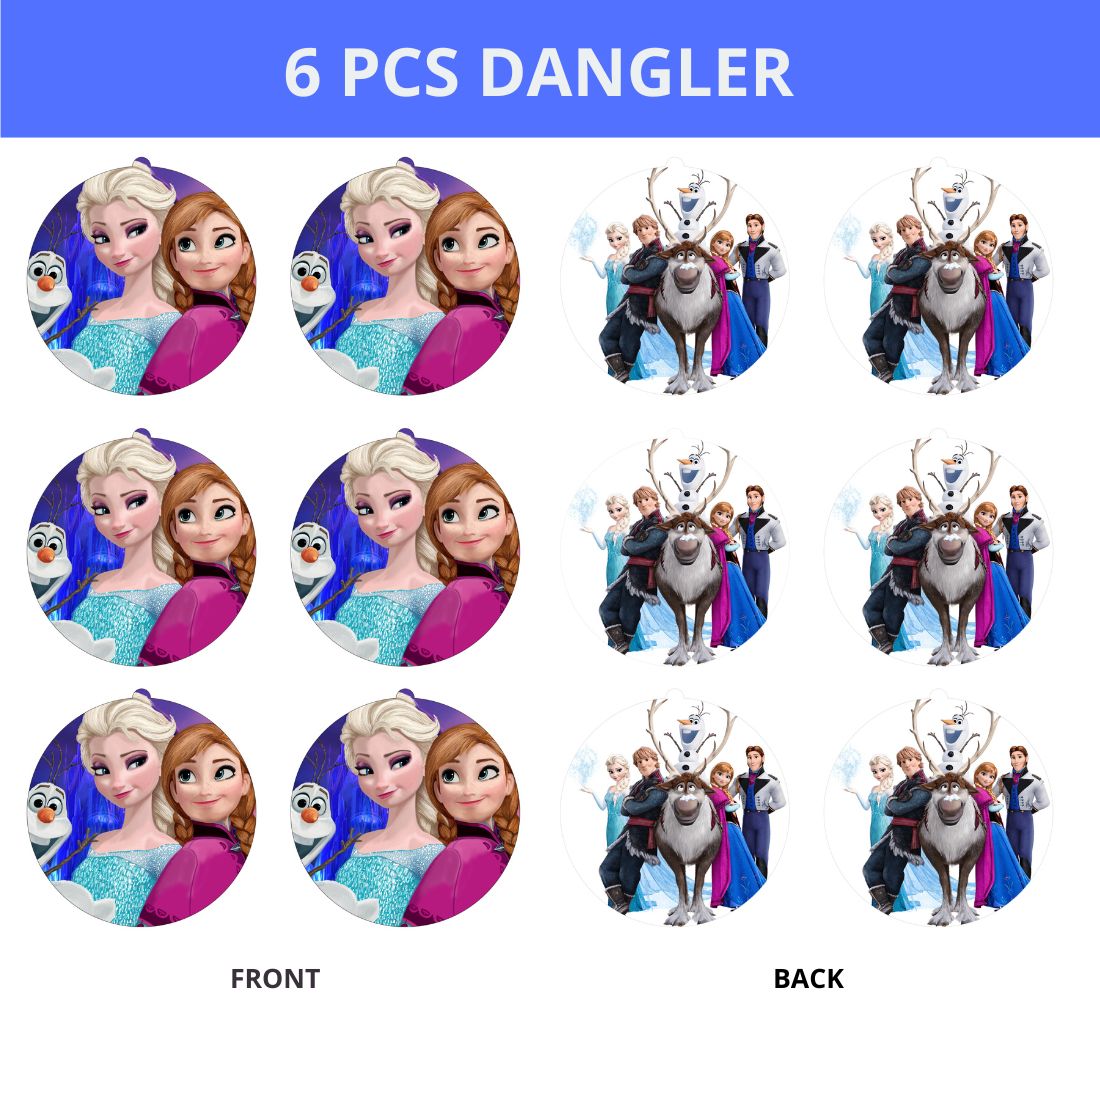 Frozen Princess Theme Hanging Danglers - Set of 6, Double-Sided Prints, 6 Inches Each with Hanging Ribbon